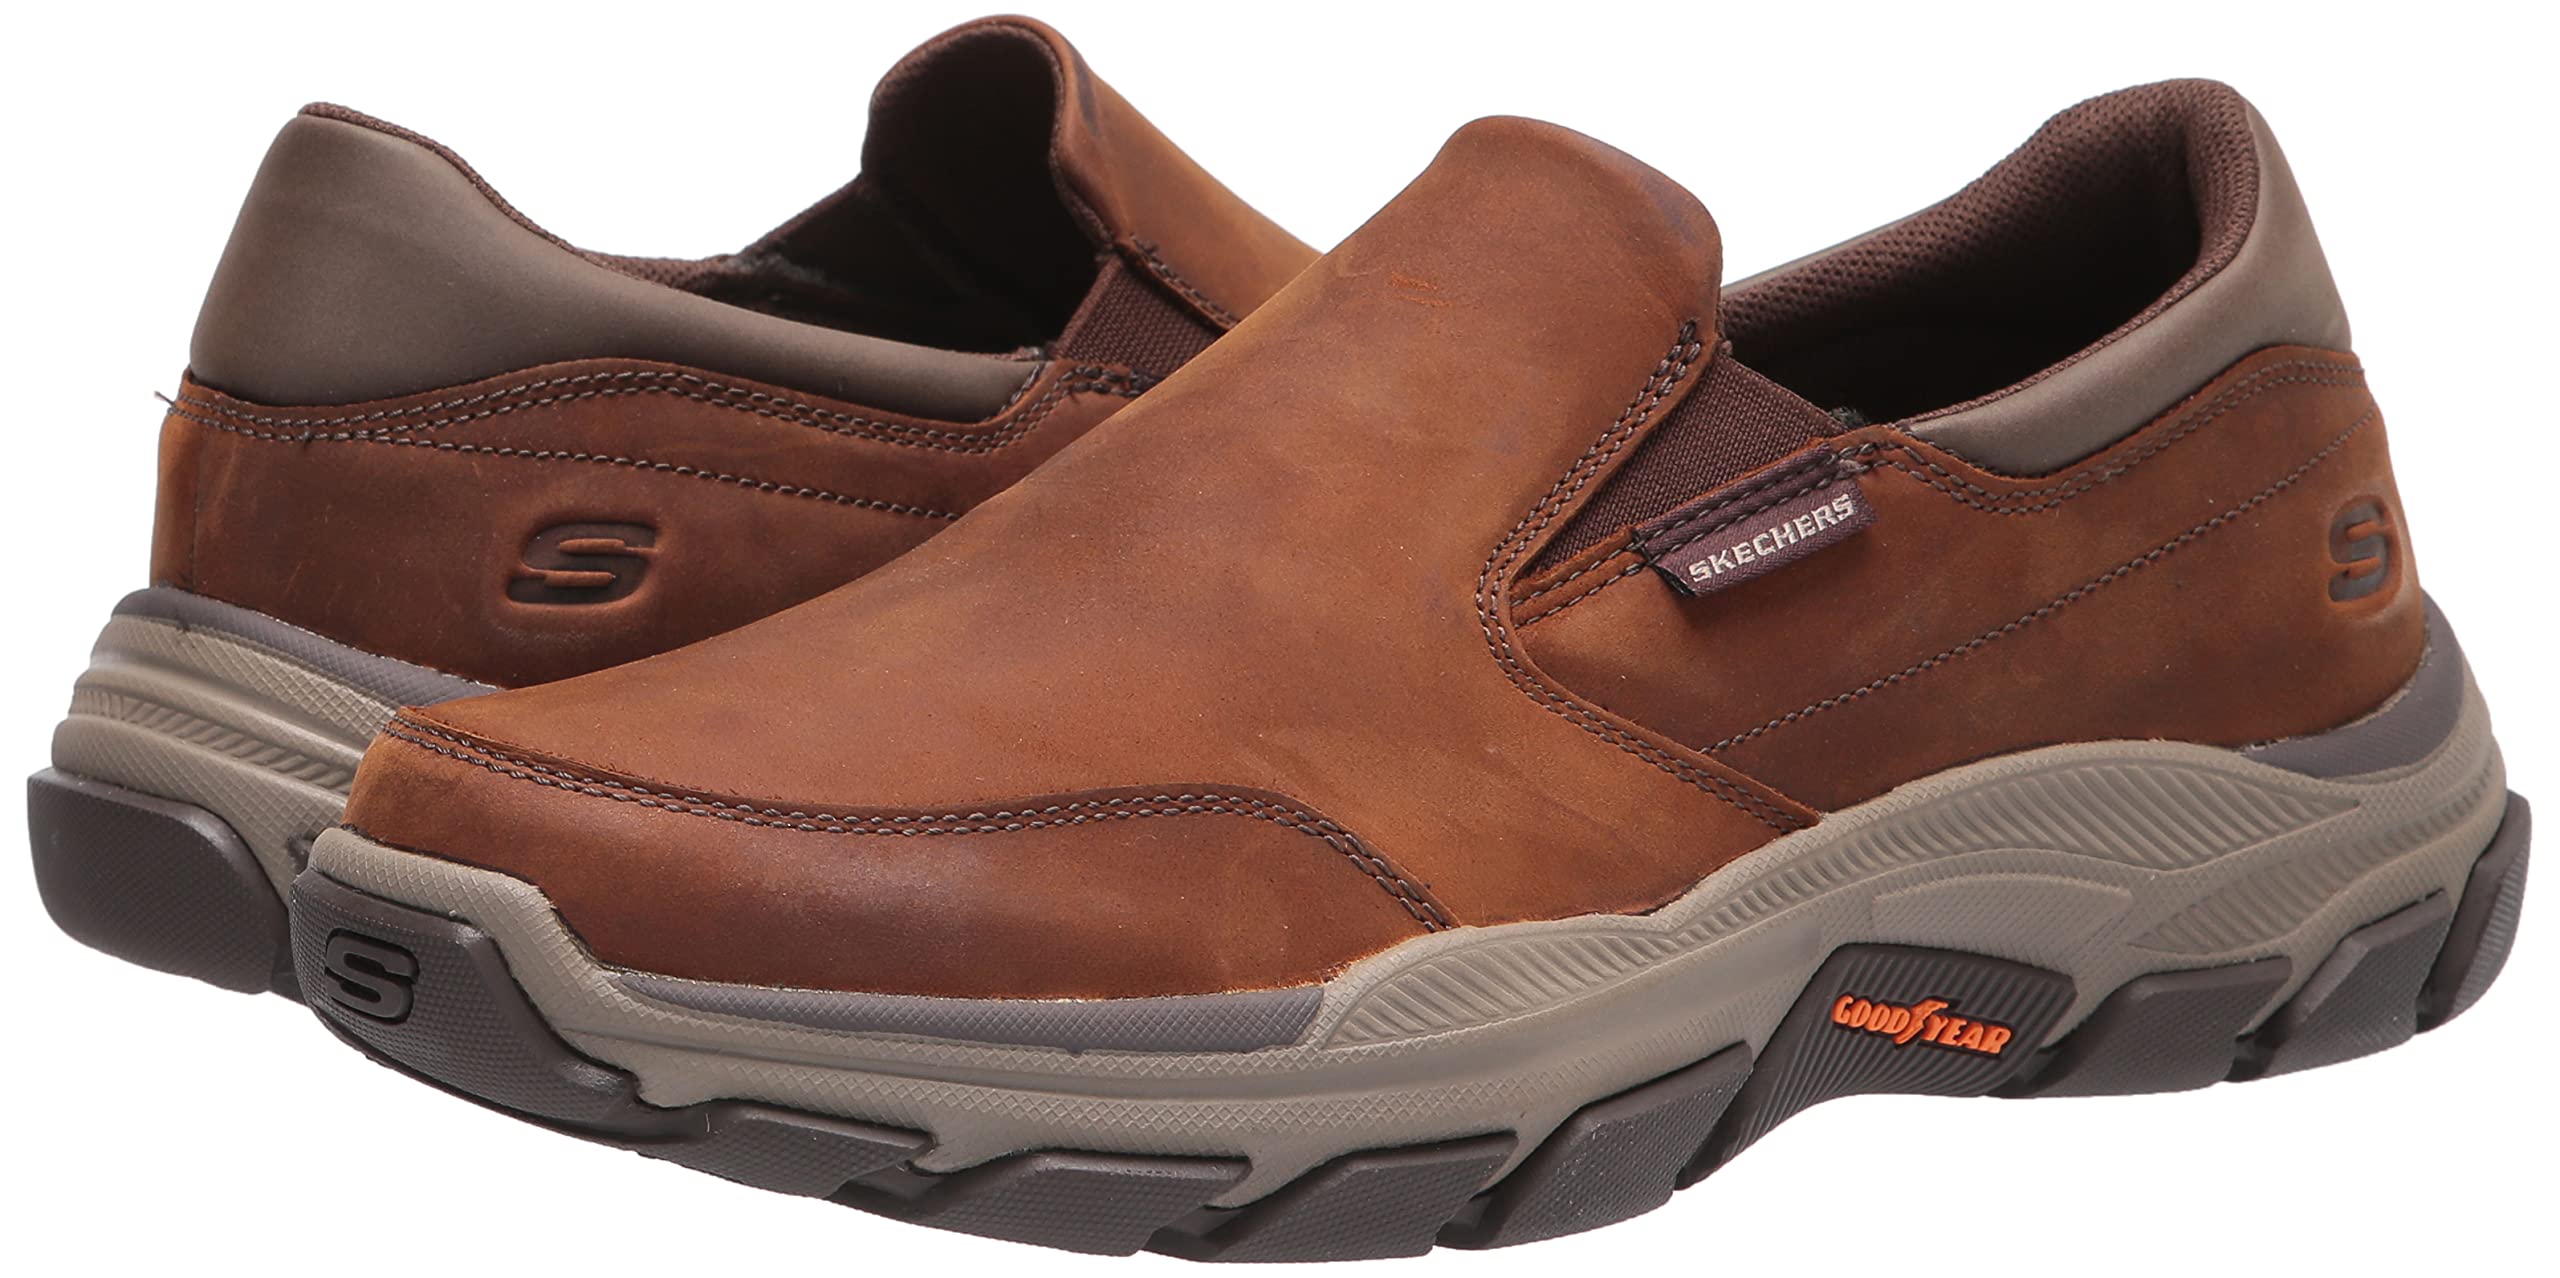 Skechers Men's Respected-Calum Goodyear Rubber Low Profile Leather Slip on with Twin Gore Loafer